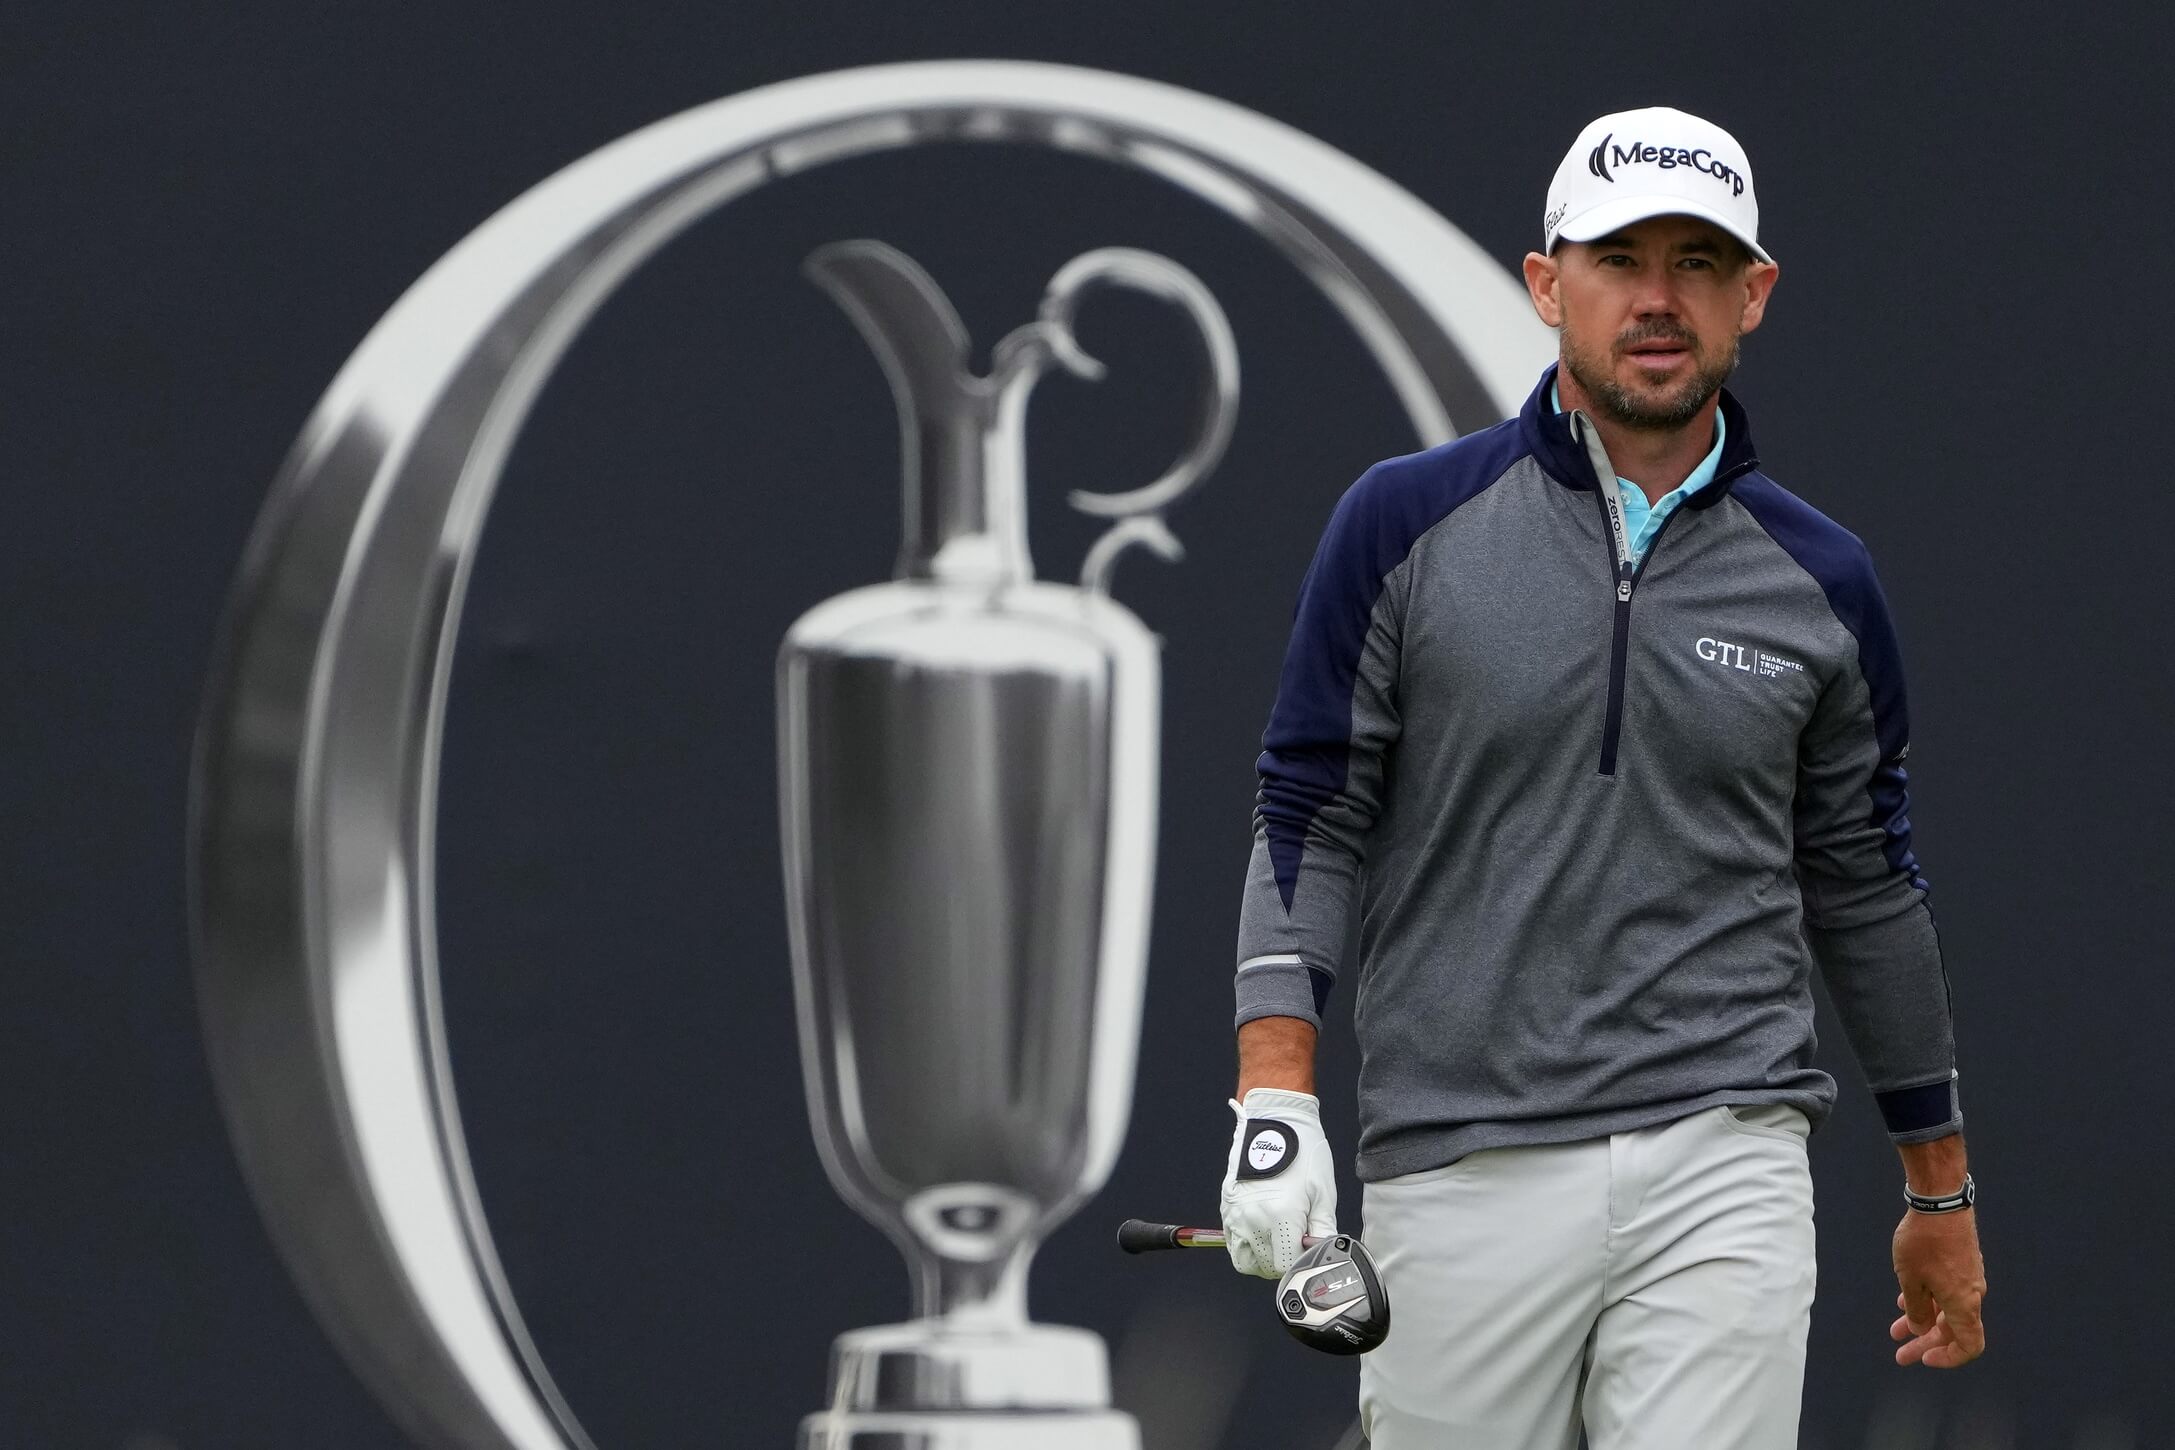 How To Bet - Make Smarter Open Championship Bets